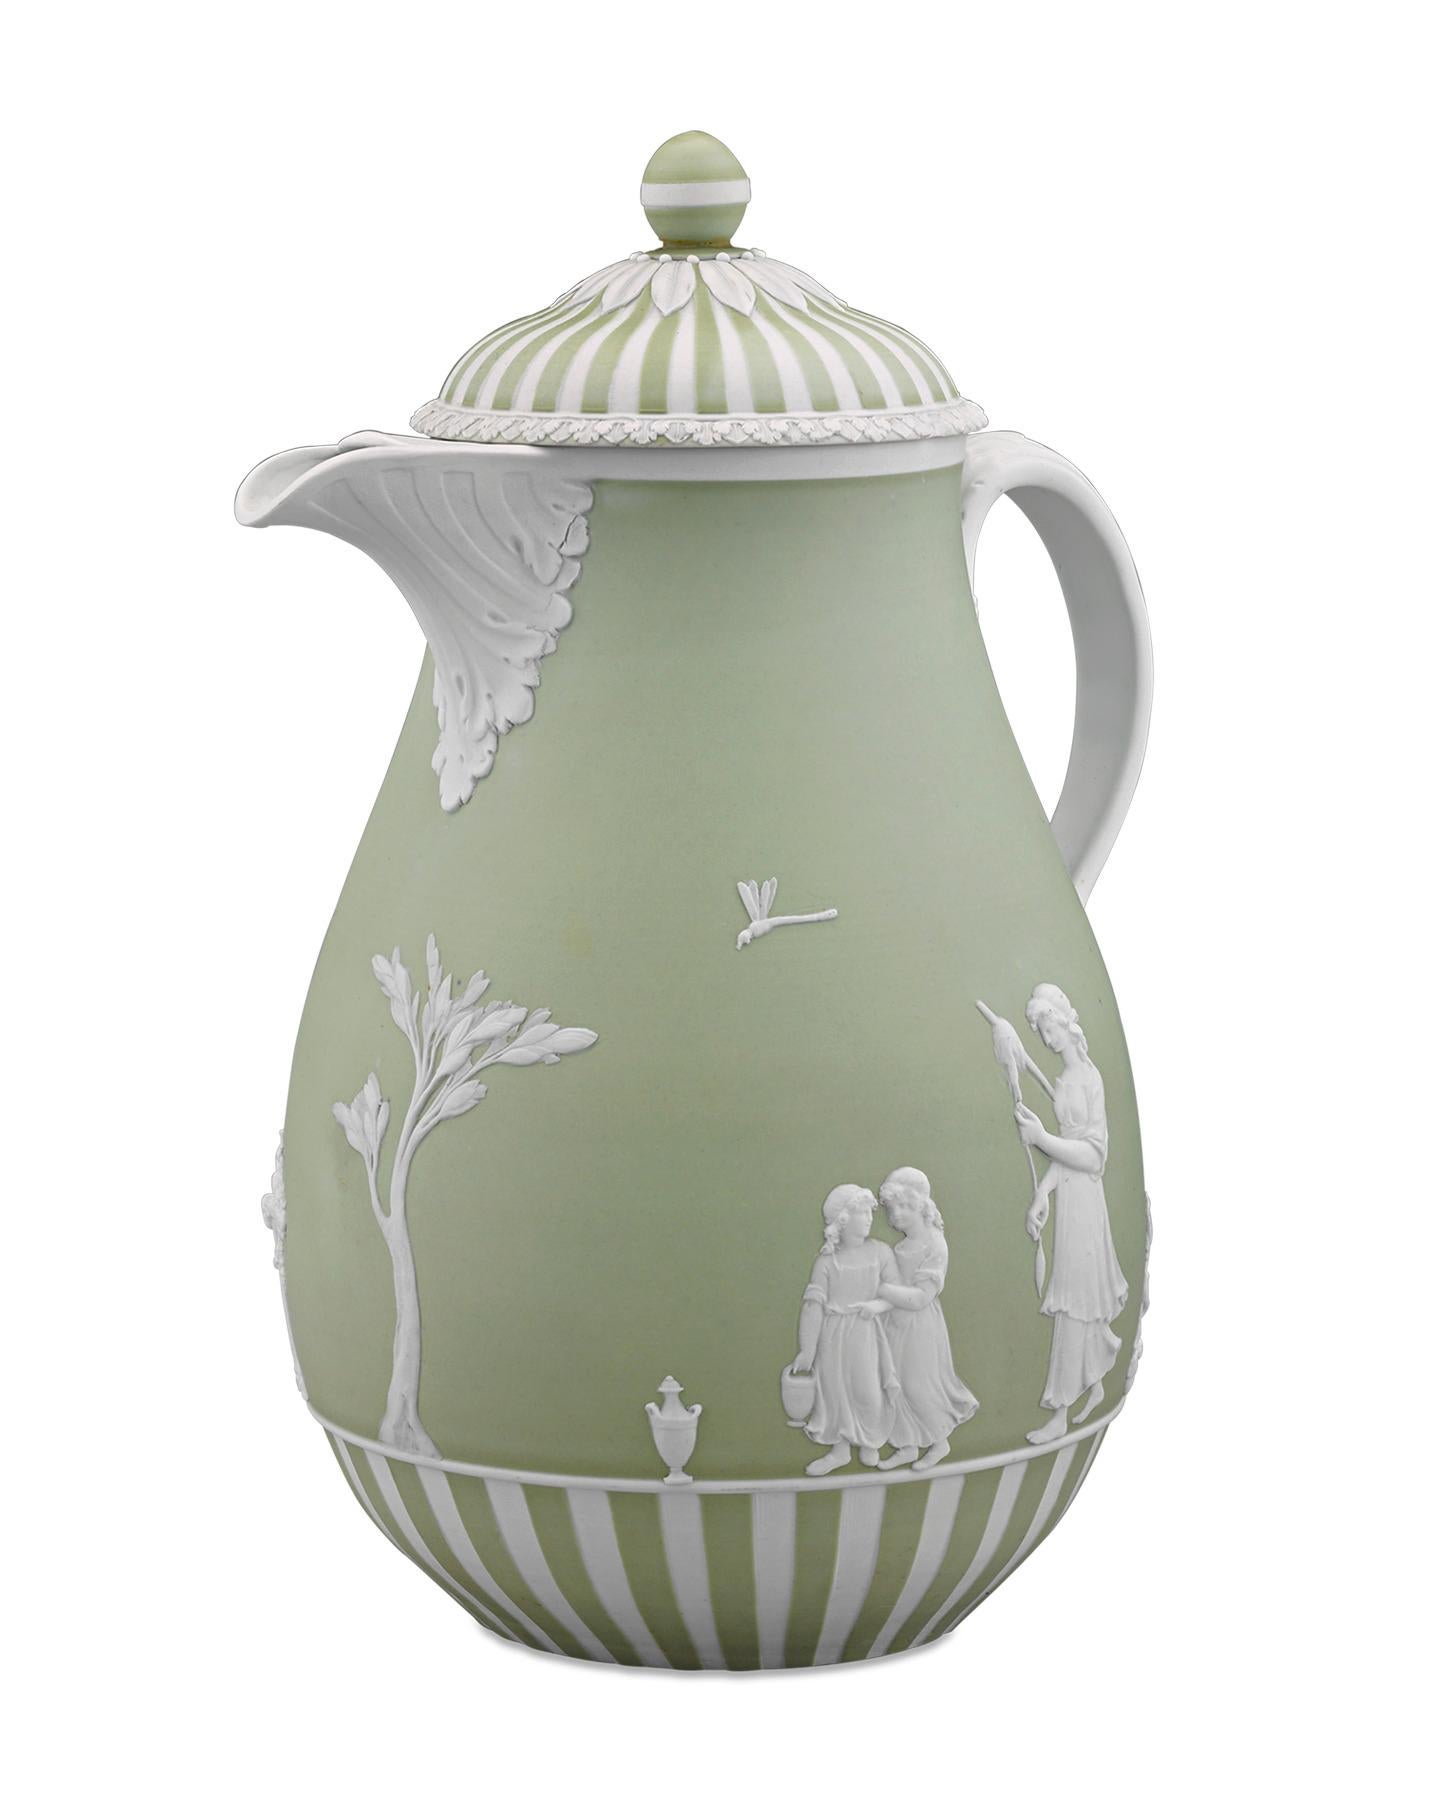 This soft green and white coffee pot by Wedgwood features the rare and highly prized applied relief work of Lady Templeton, the only woman to ever directly collaborate with the creative and business genius Josiah Wedgwood. Exhibiting the dry